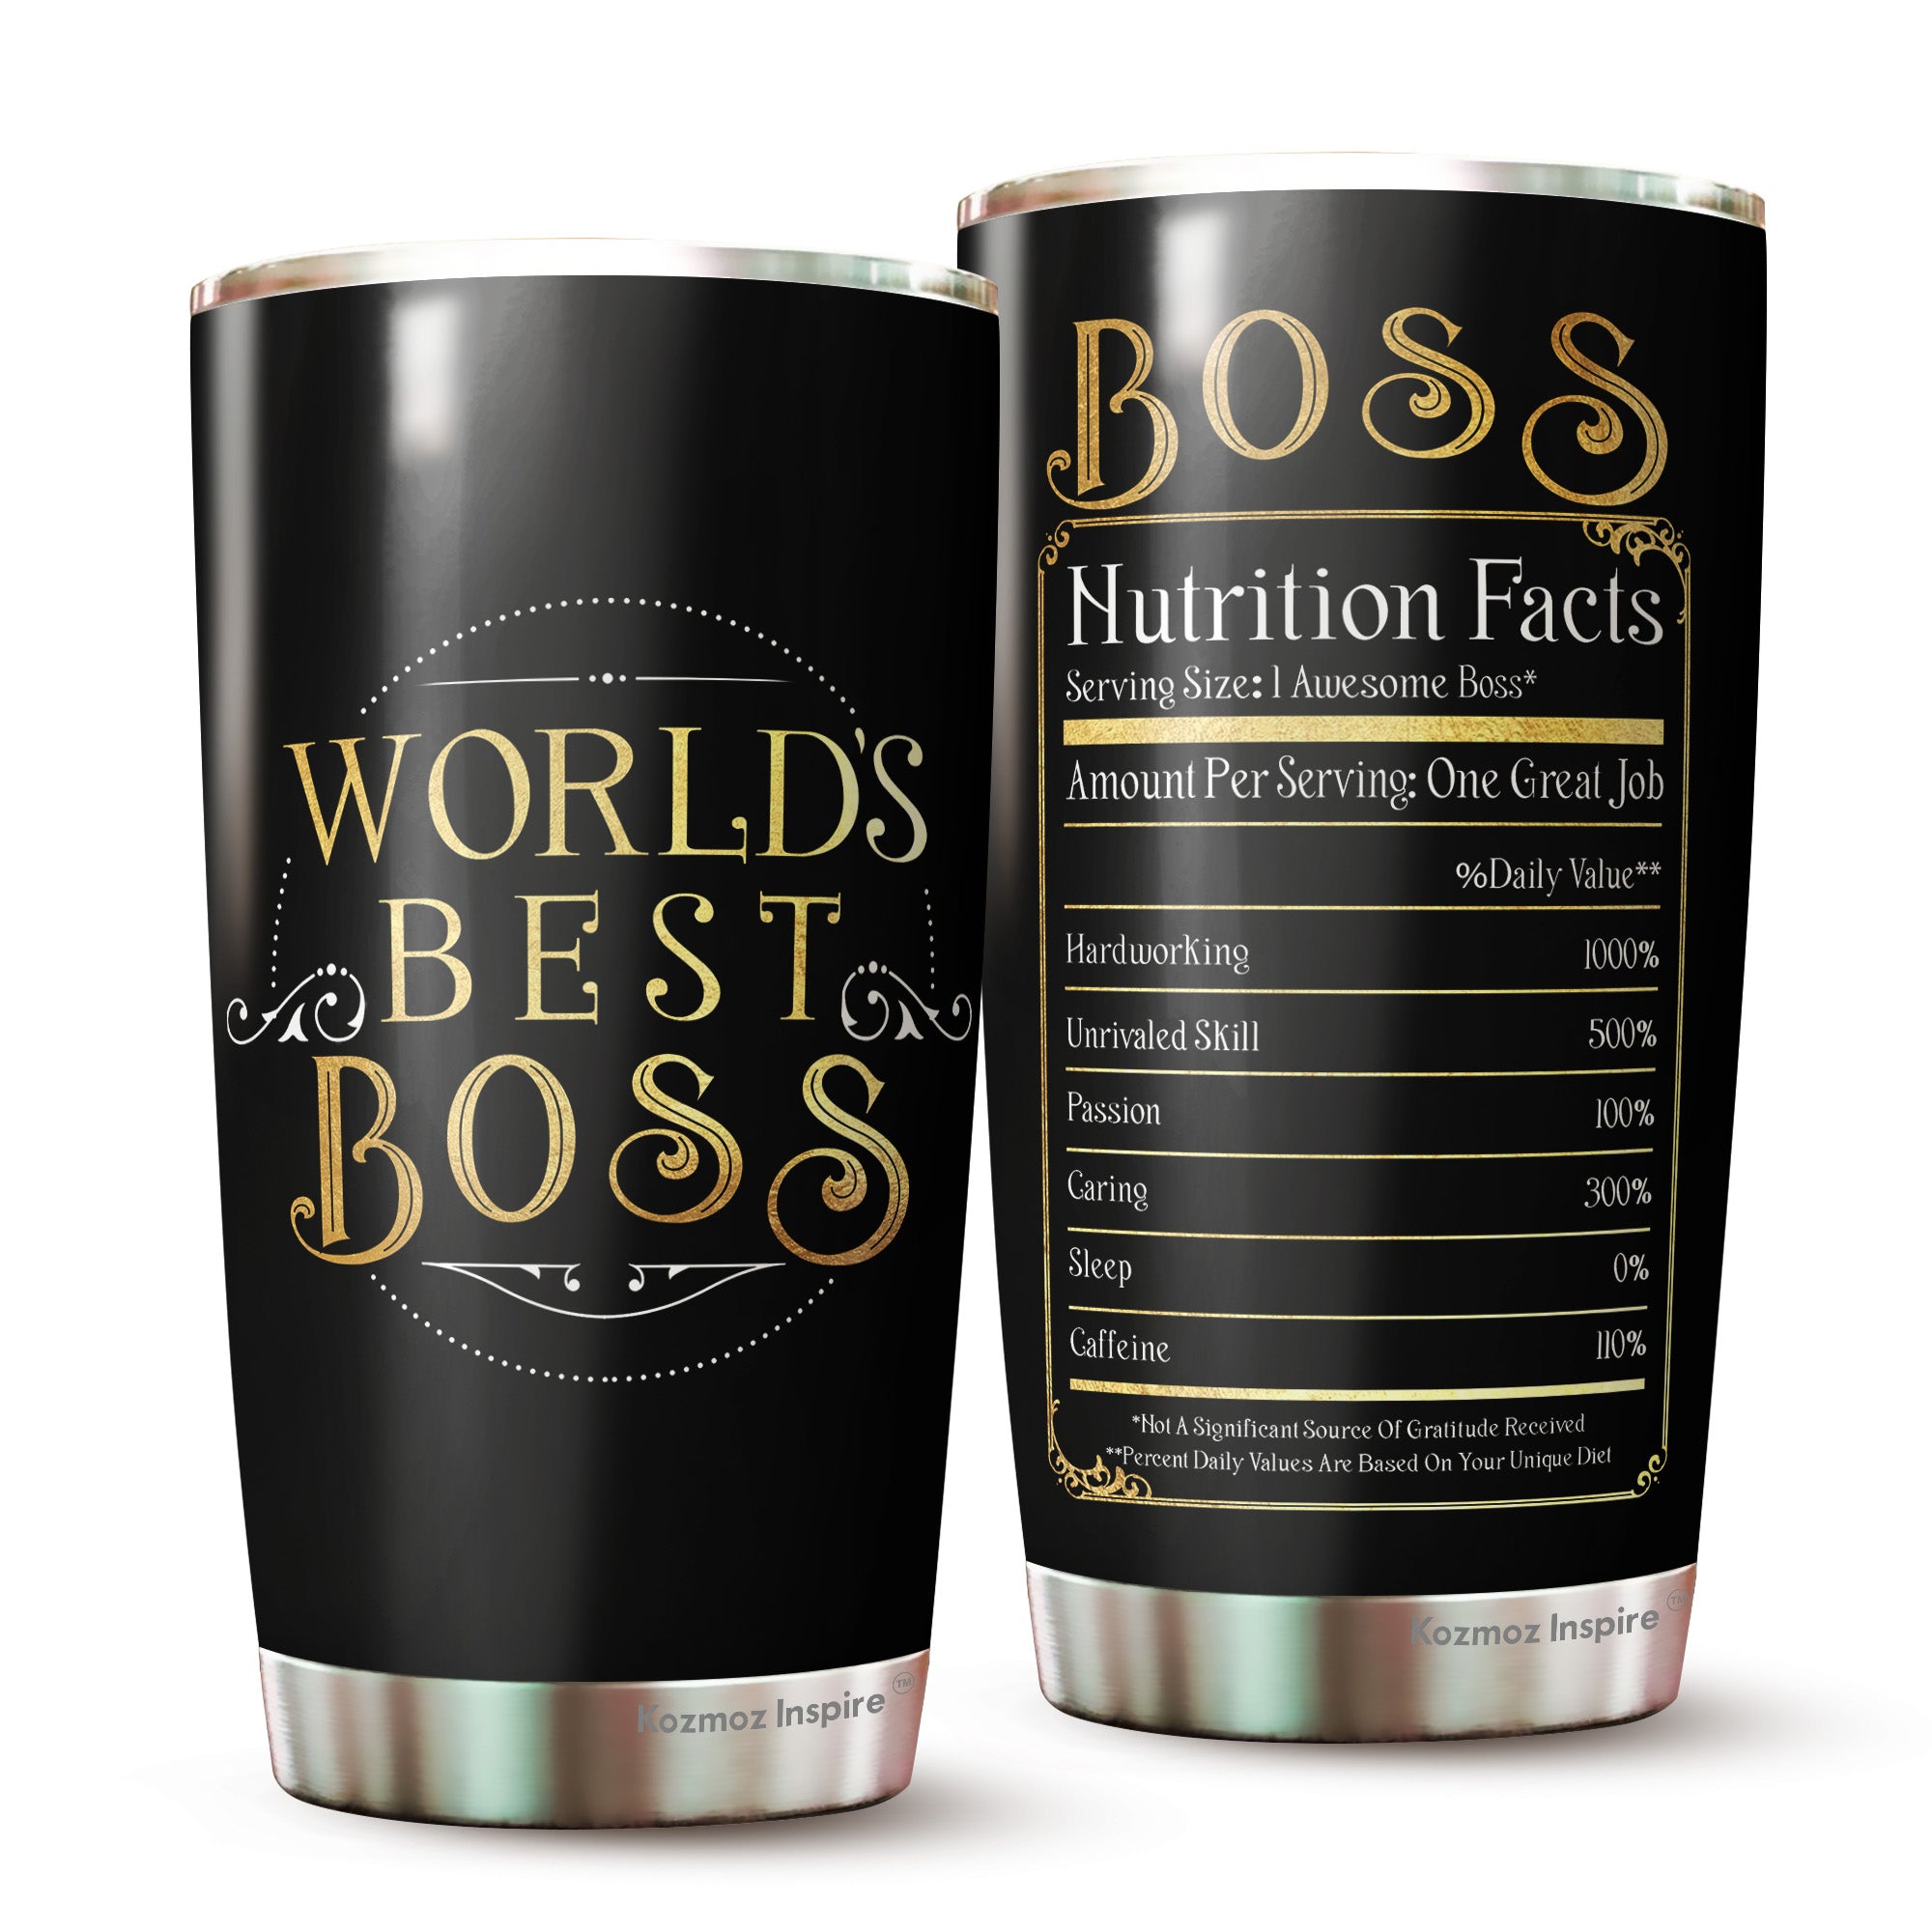 Veeki Funny Boss Nutritional Fatcs 11 Ounces Coffee Mug Gift For Boss,  Manager, Ceo, Leader From Employee - Awesome Tea Cup Present For Birthday,  Chri | Fruugo AE